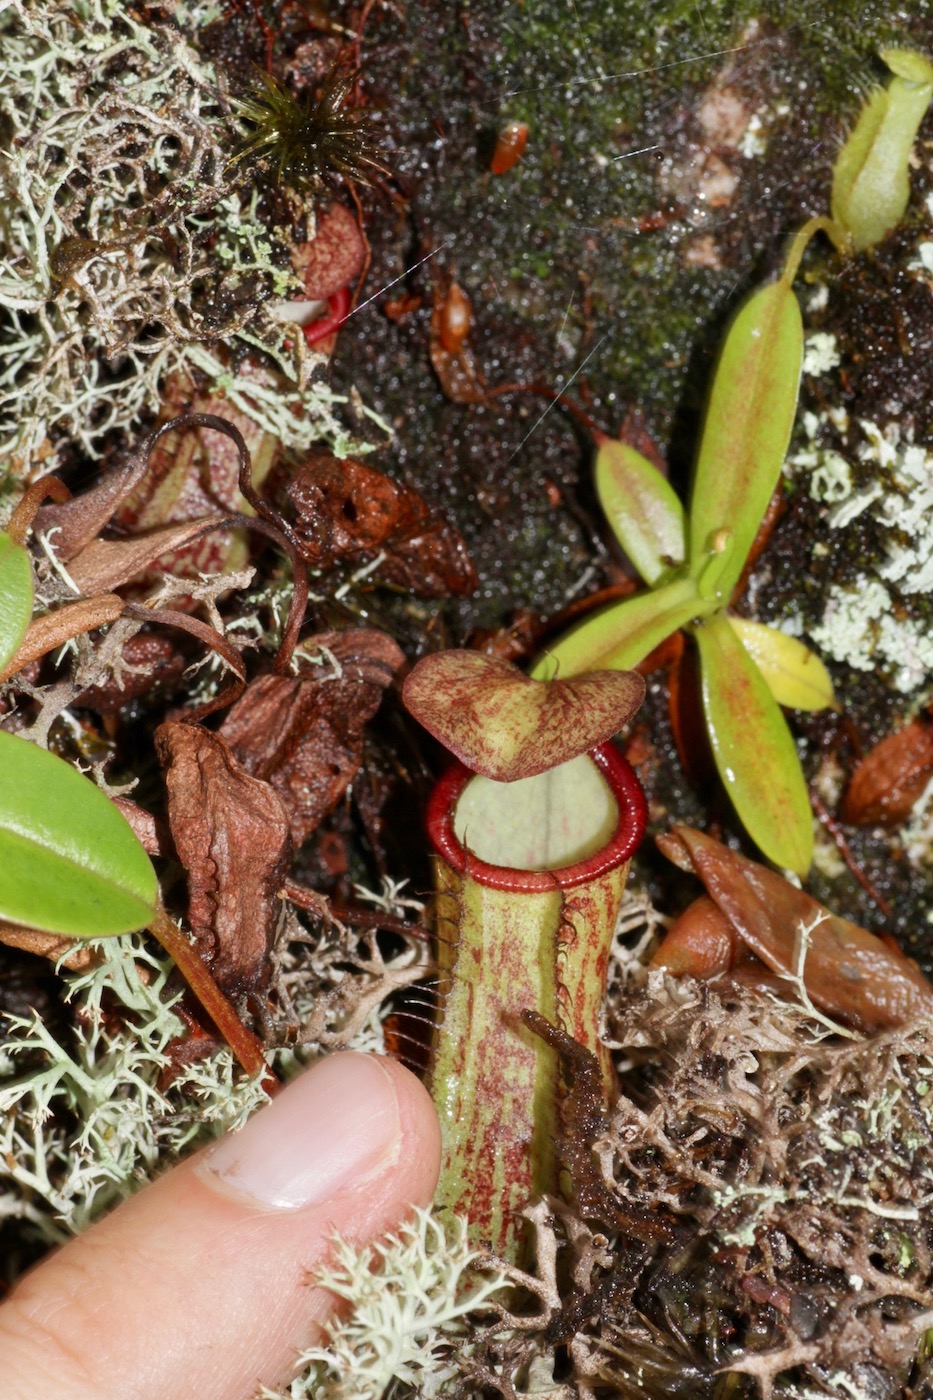 Image of Nepenthes macfarlanei specimen.